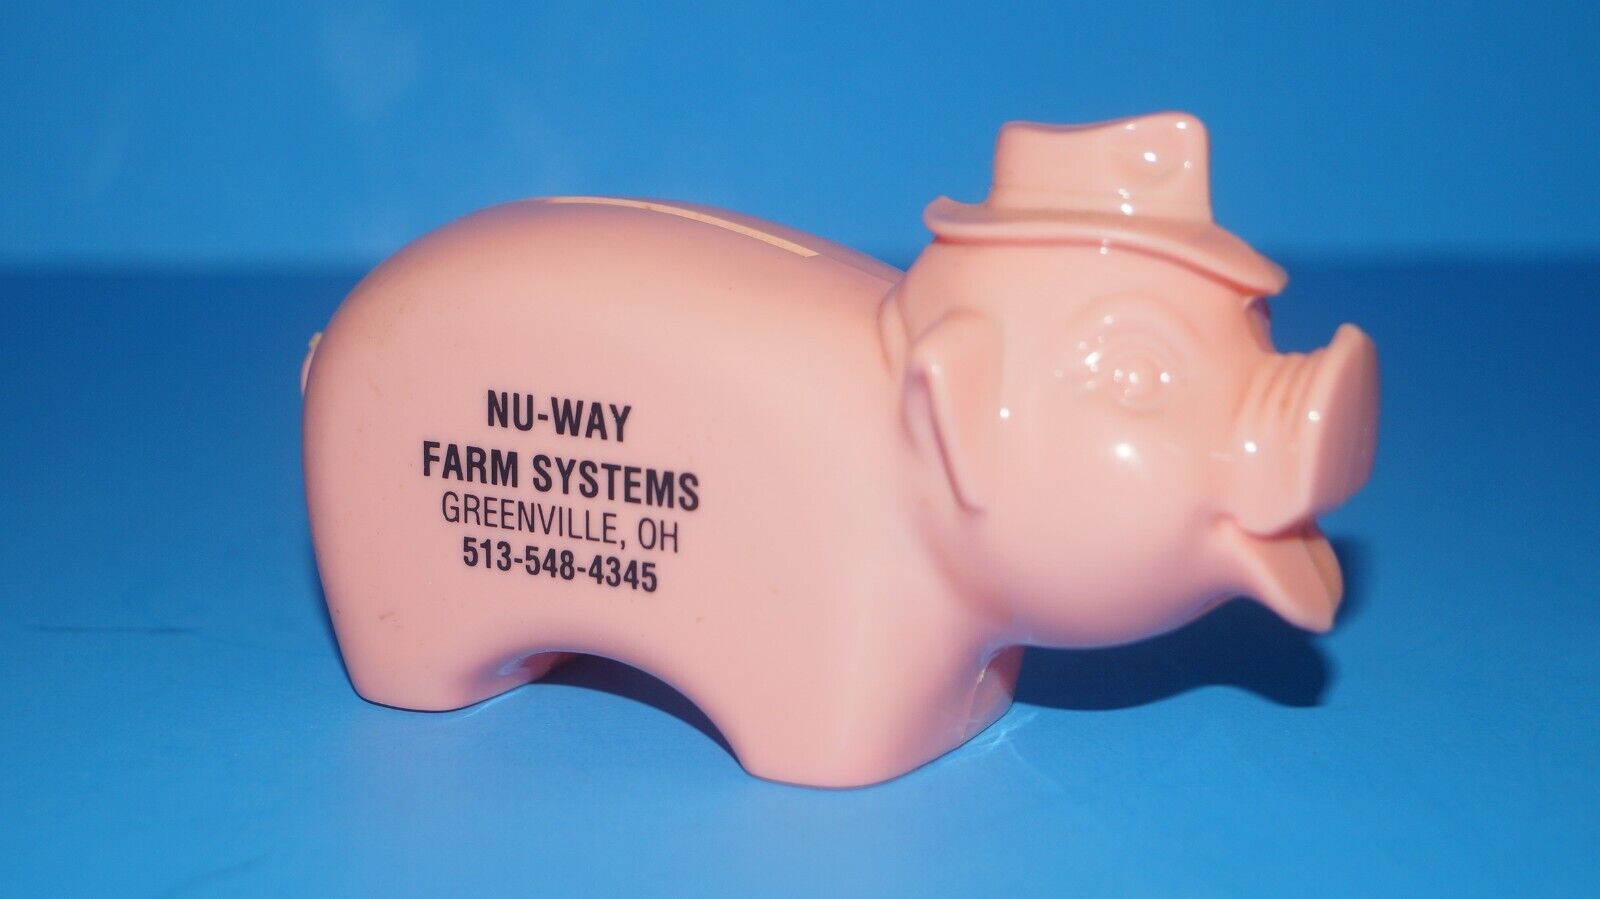 VINTAGE NU-WAY FARM SYSTEMS GREENVILLE OHIO PIG COIN BANK